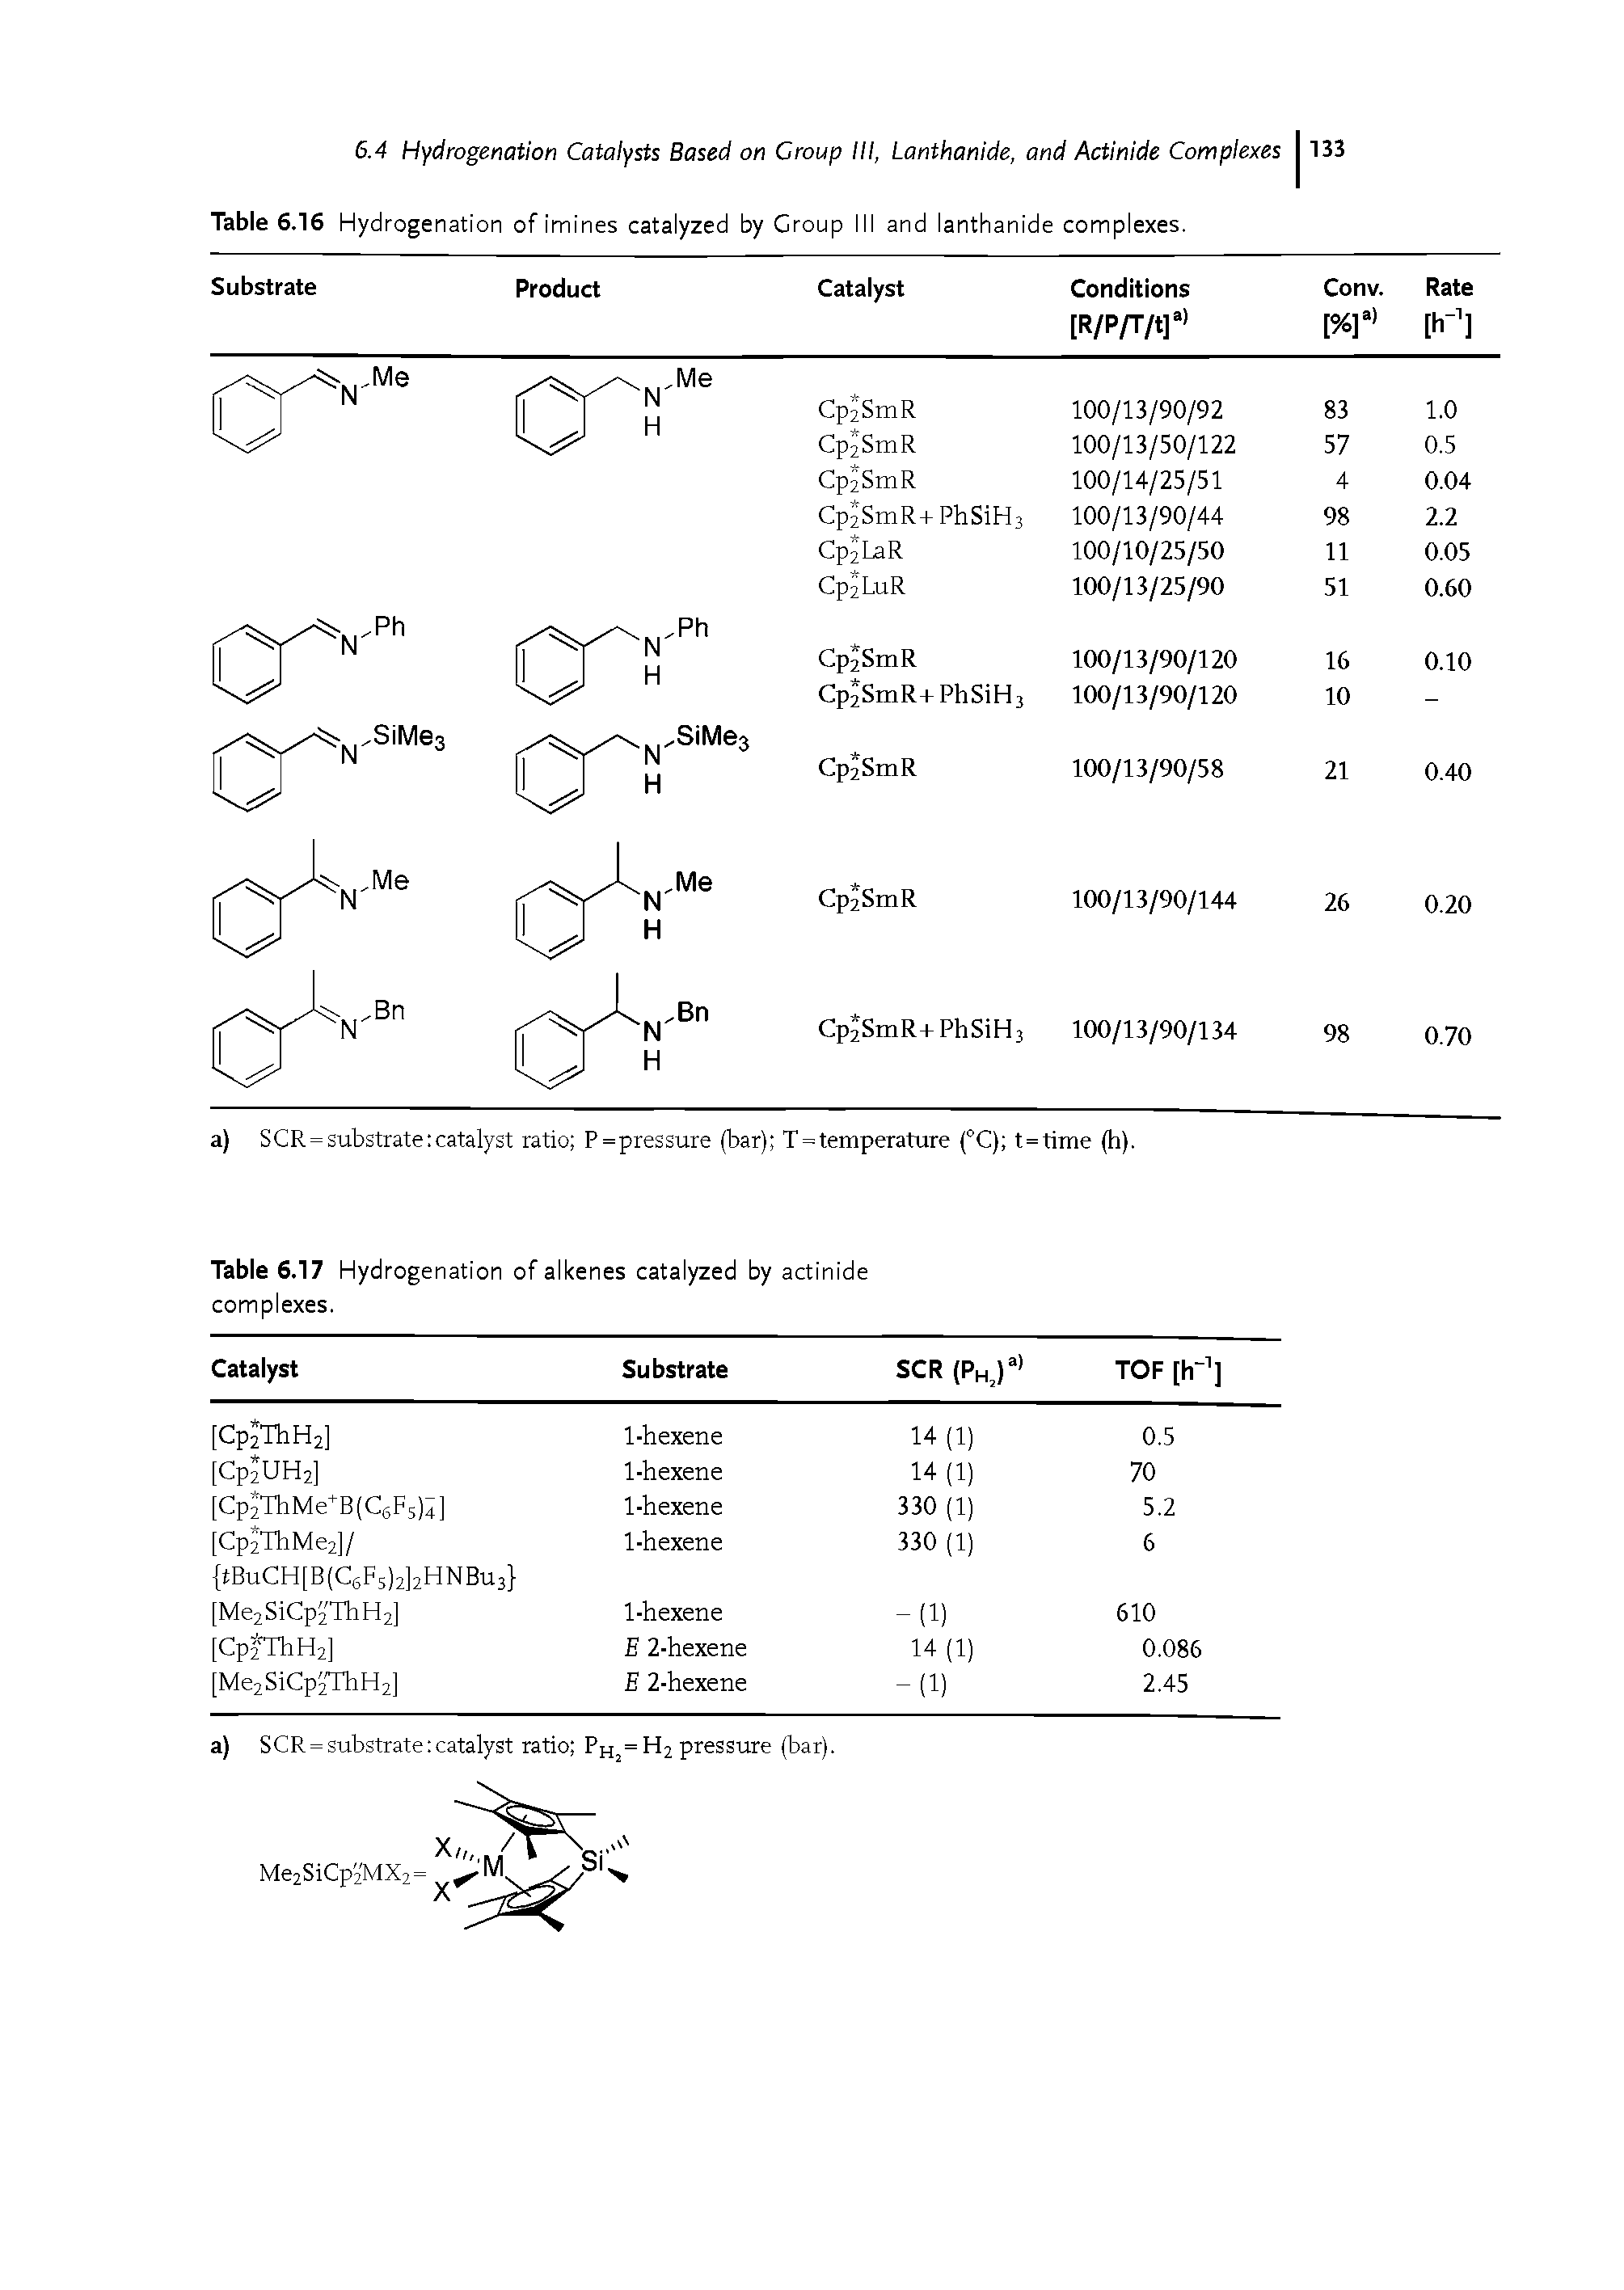 Table 6.17 Hydrogenation of alkenes catalyzed by actinide complexes.